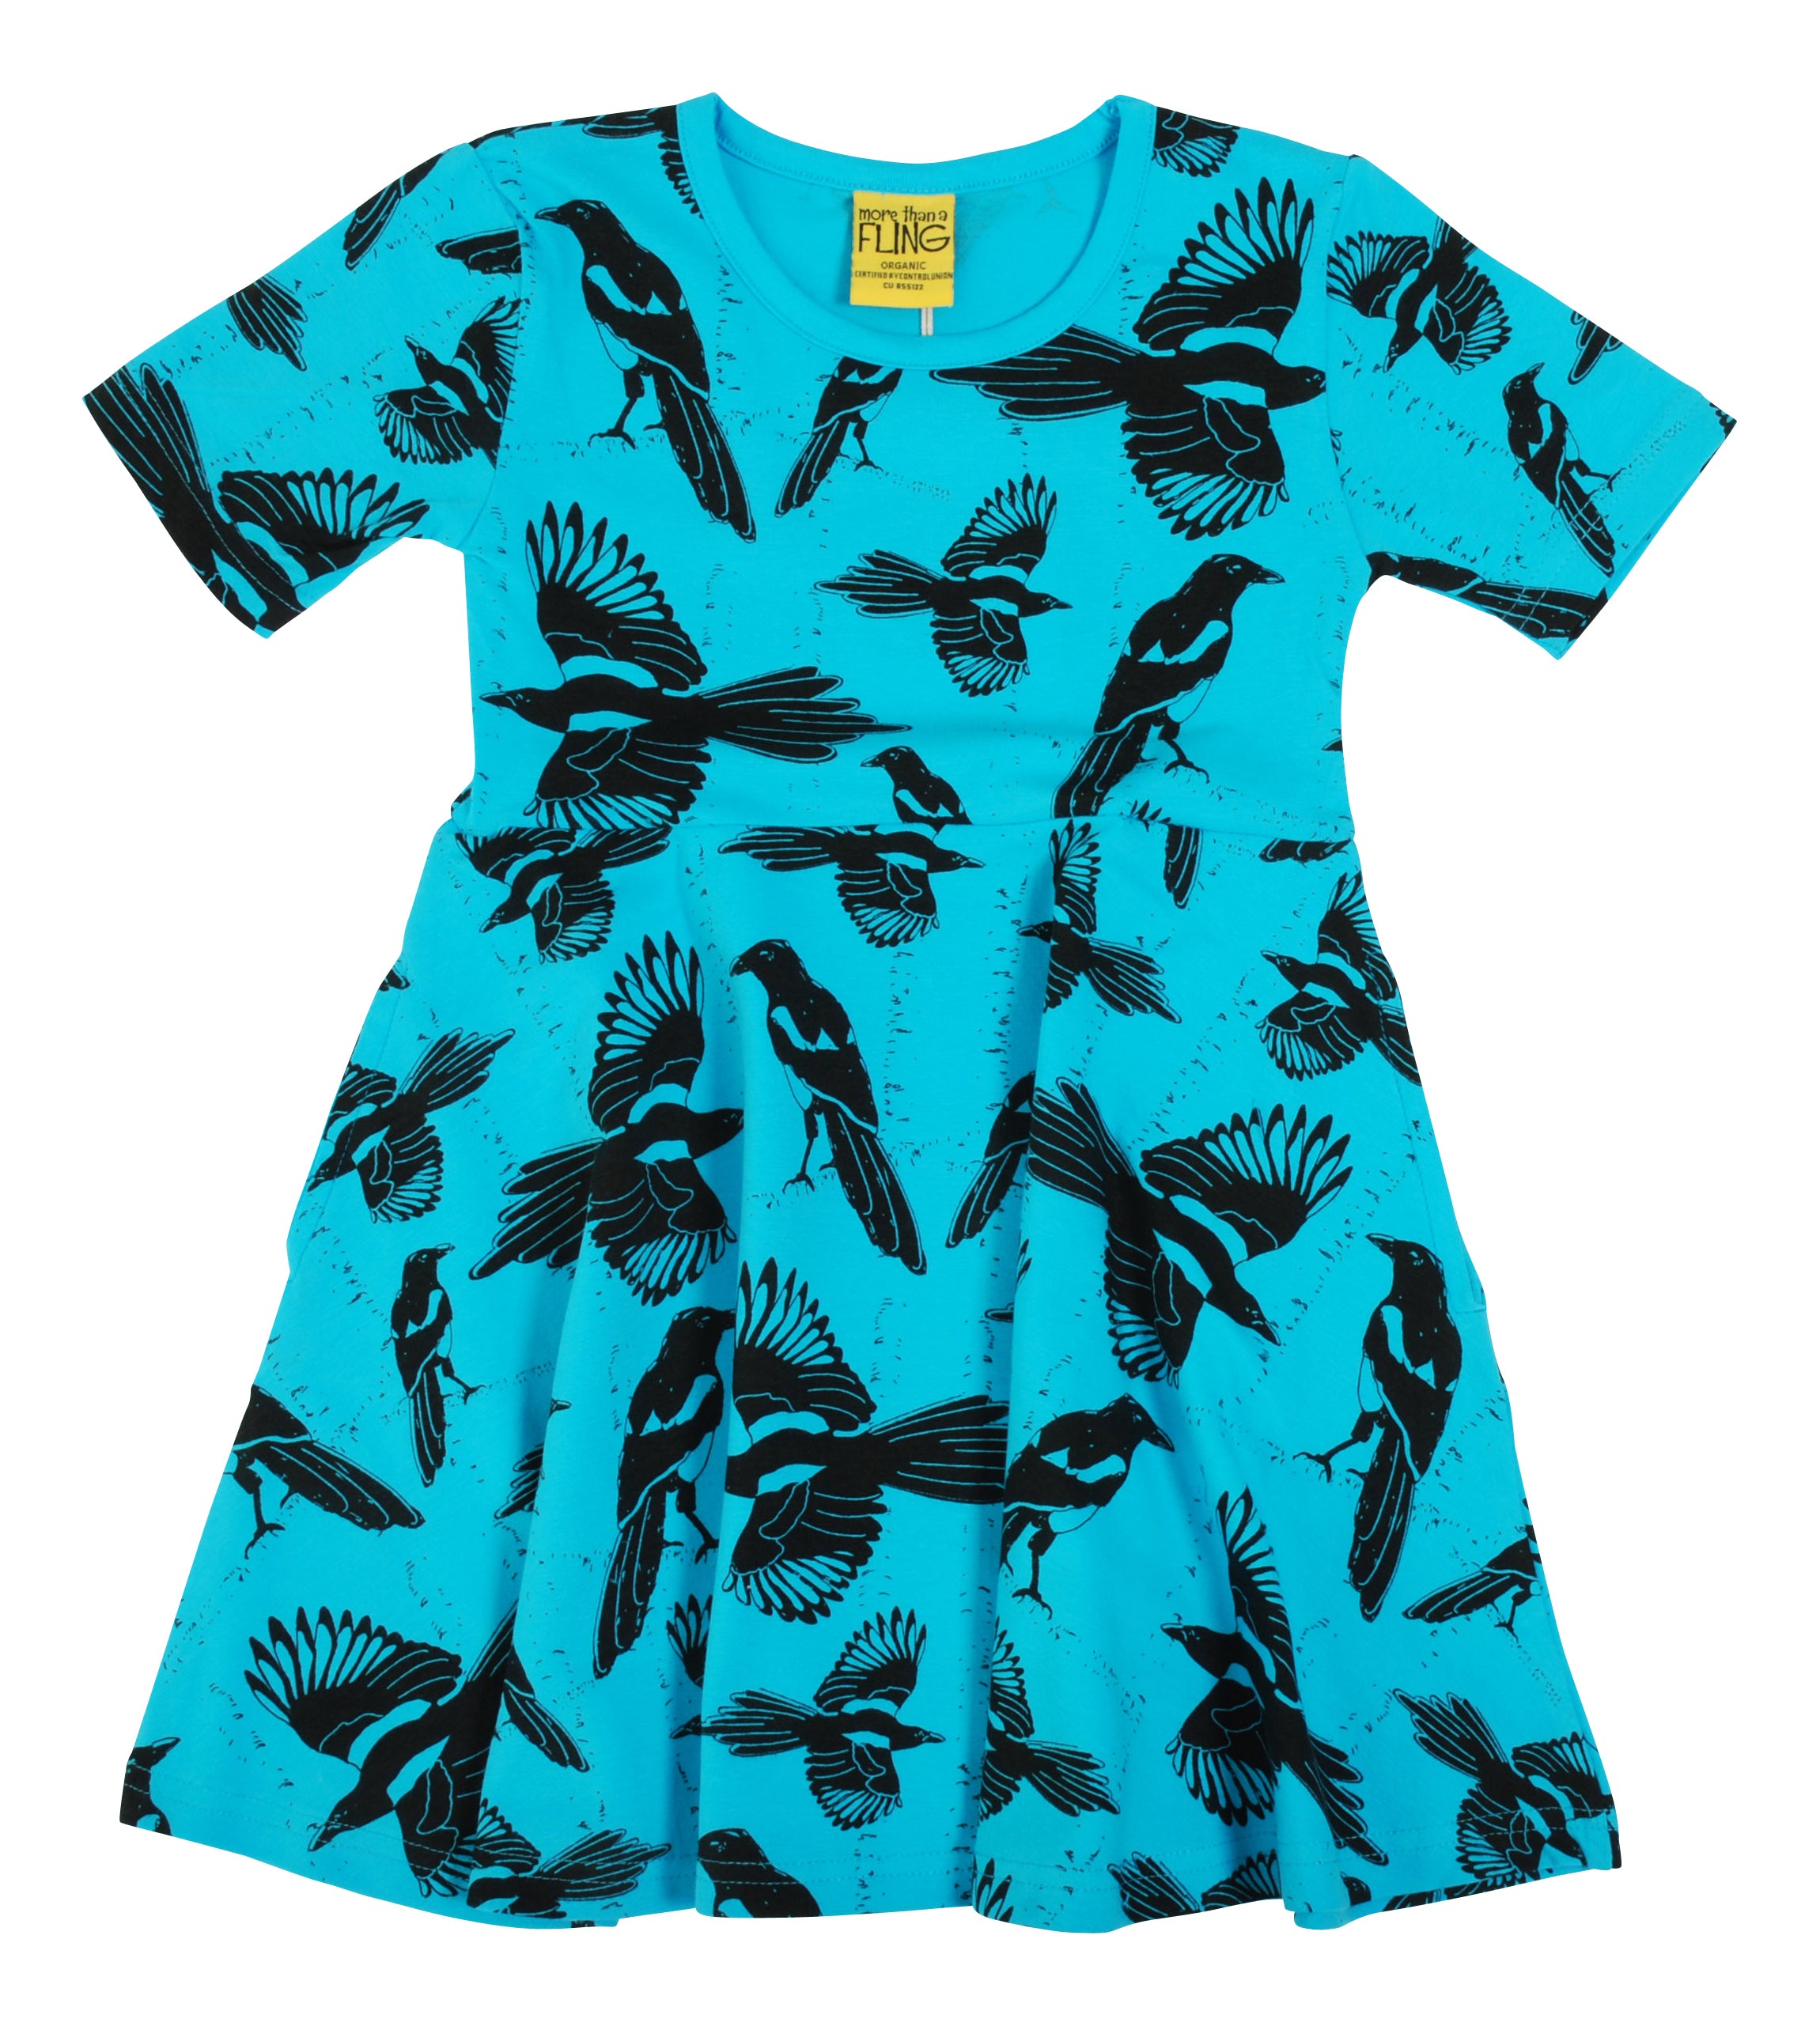 More Than A Fling - Skater Dress - Pica Pica - Blue Atoll